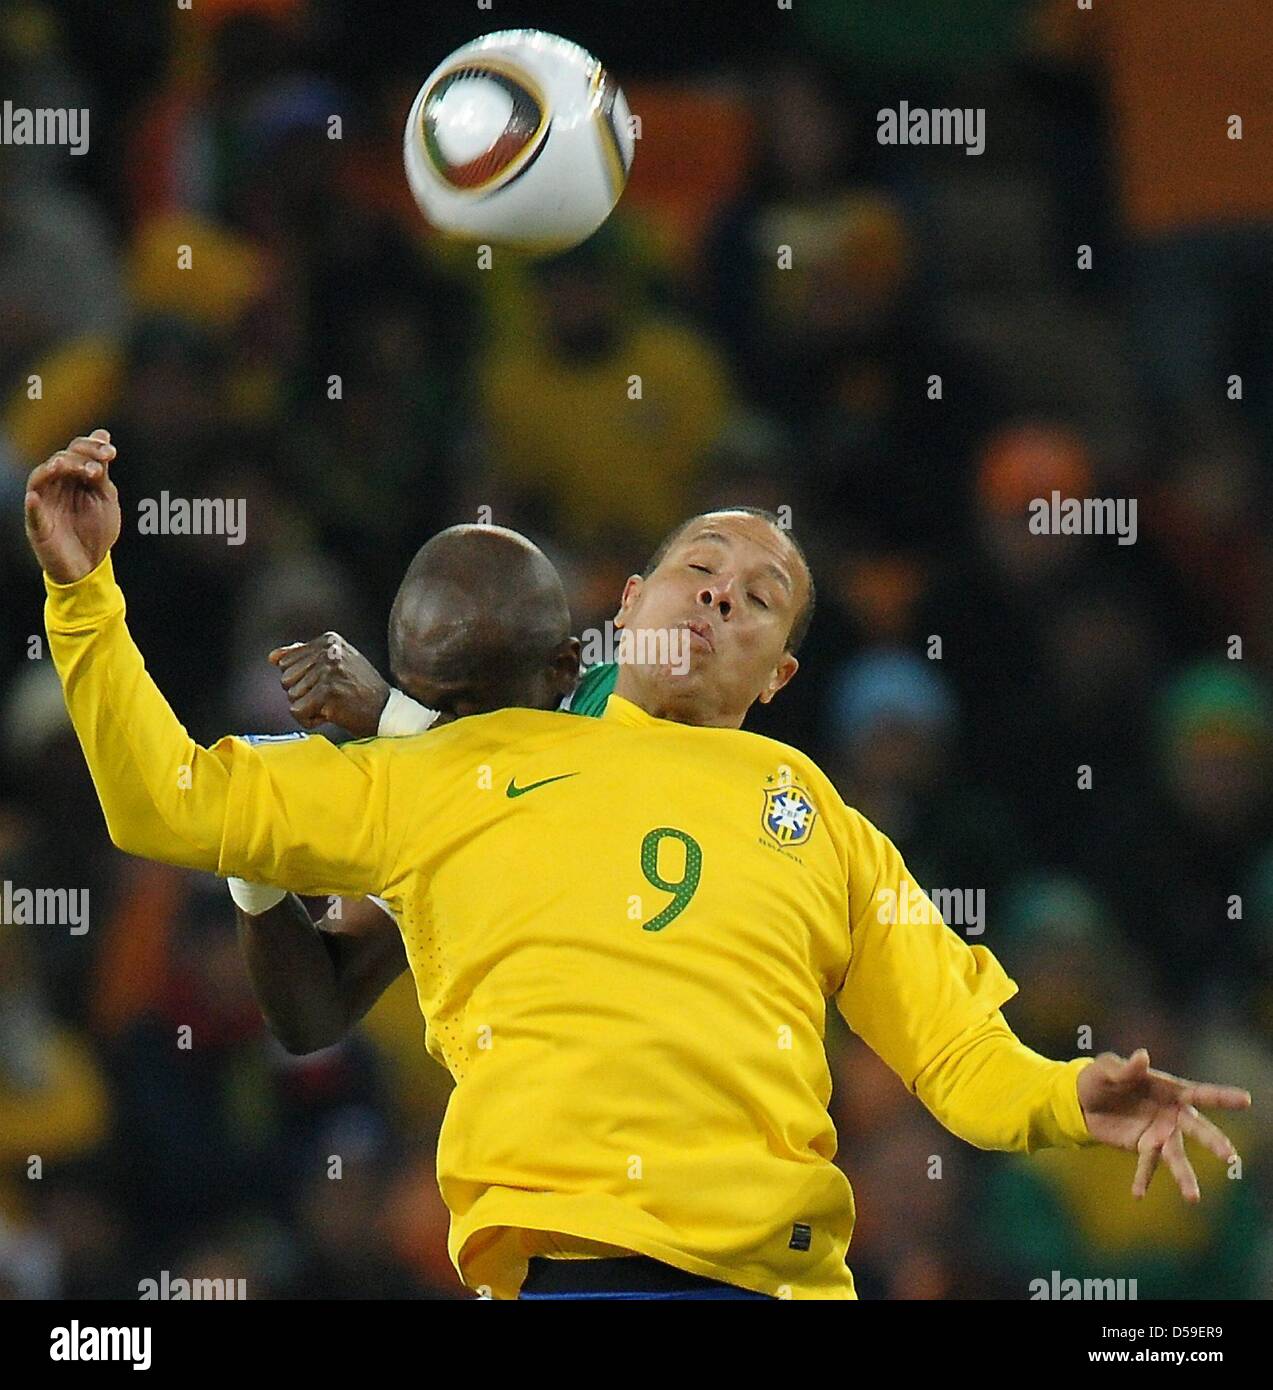 Luis Fabiano (front) of Brazil vies with Didier Zokora of Ivory Coast during the FIFA World Cup 2010 group G match between Brazil and Ivory Coast at the Soccer City Stadium in Johannesburg, South Africa 20 June 2010. Photo: Ronald Wittek dpa - Please refer to http://dpaq.de/FIFA-WM2010-TC Stock Photo